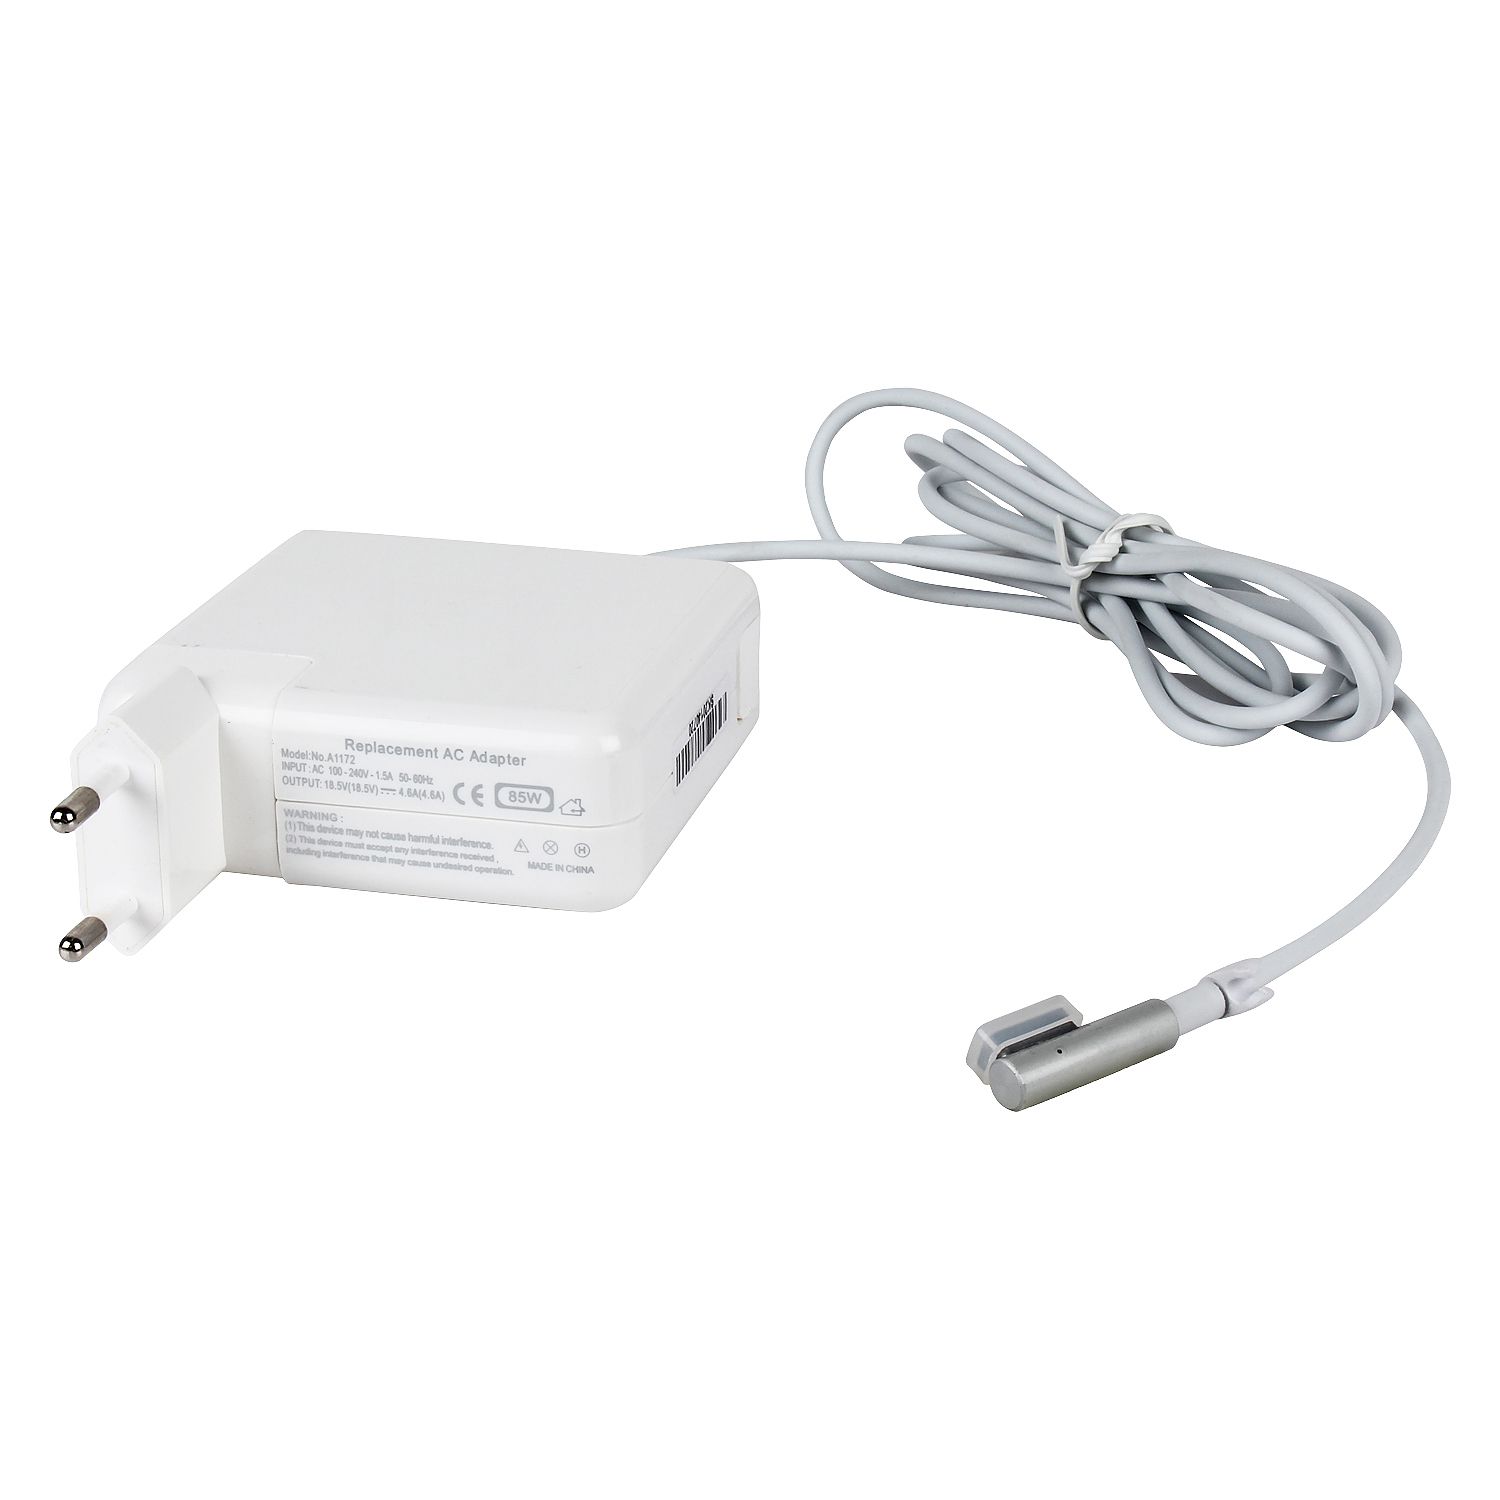 15 macbook pro charger wattage